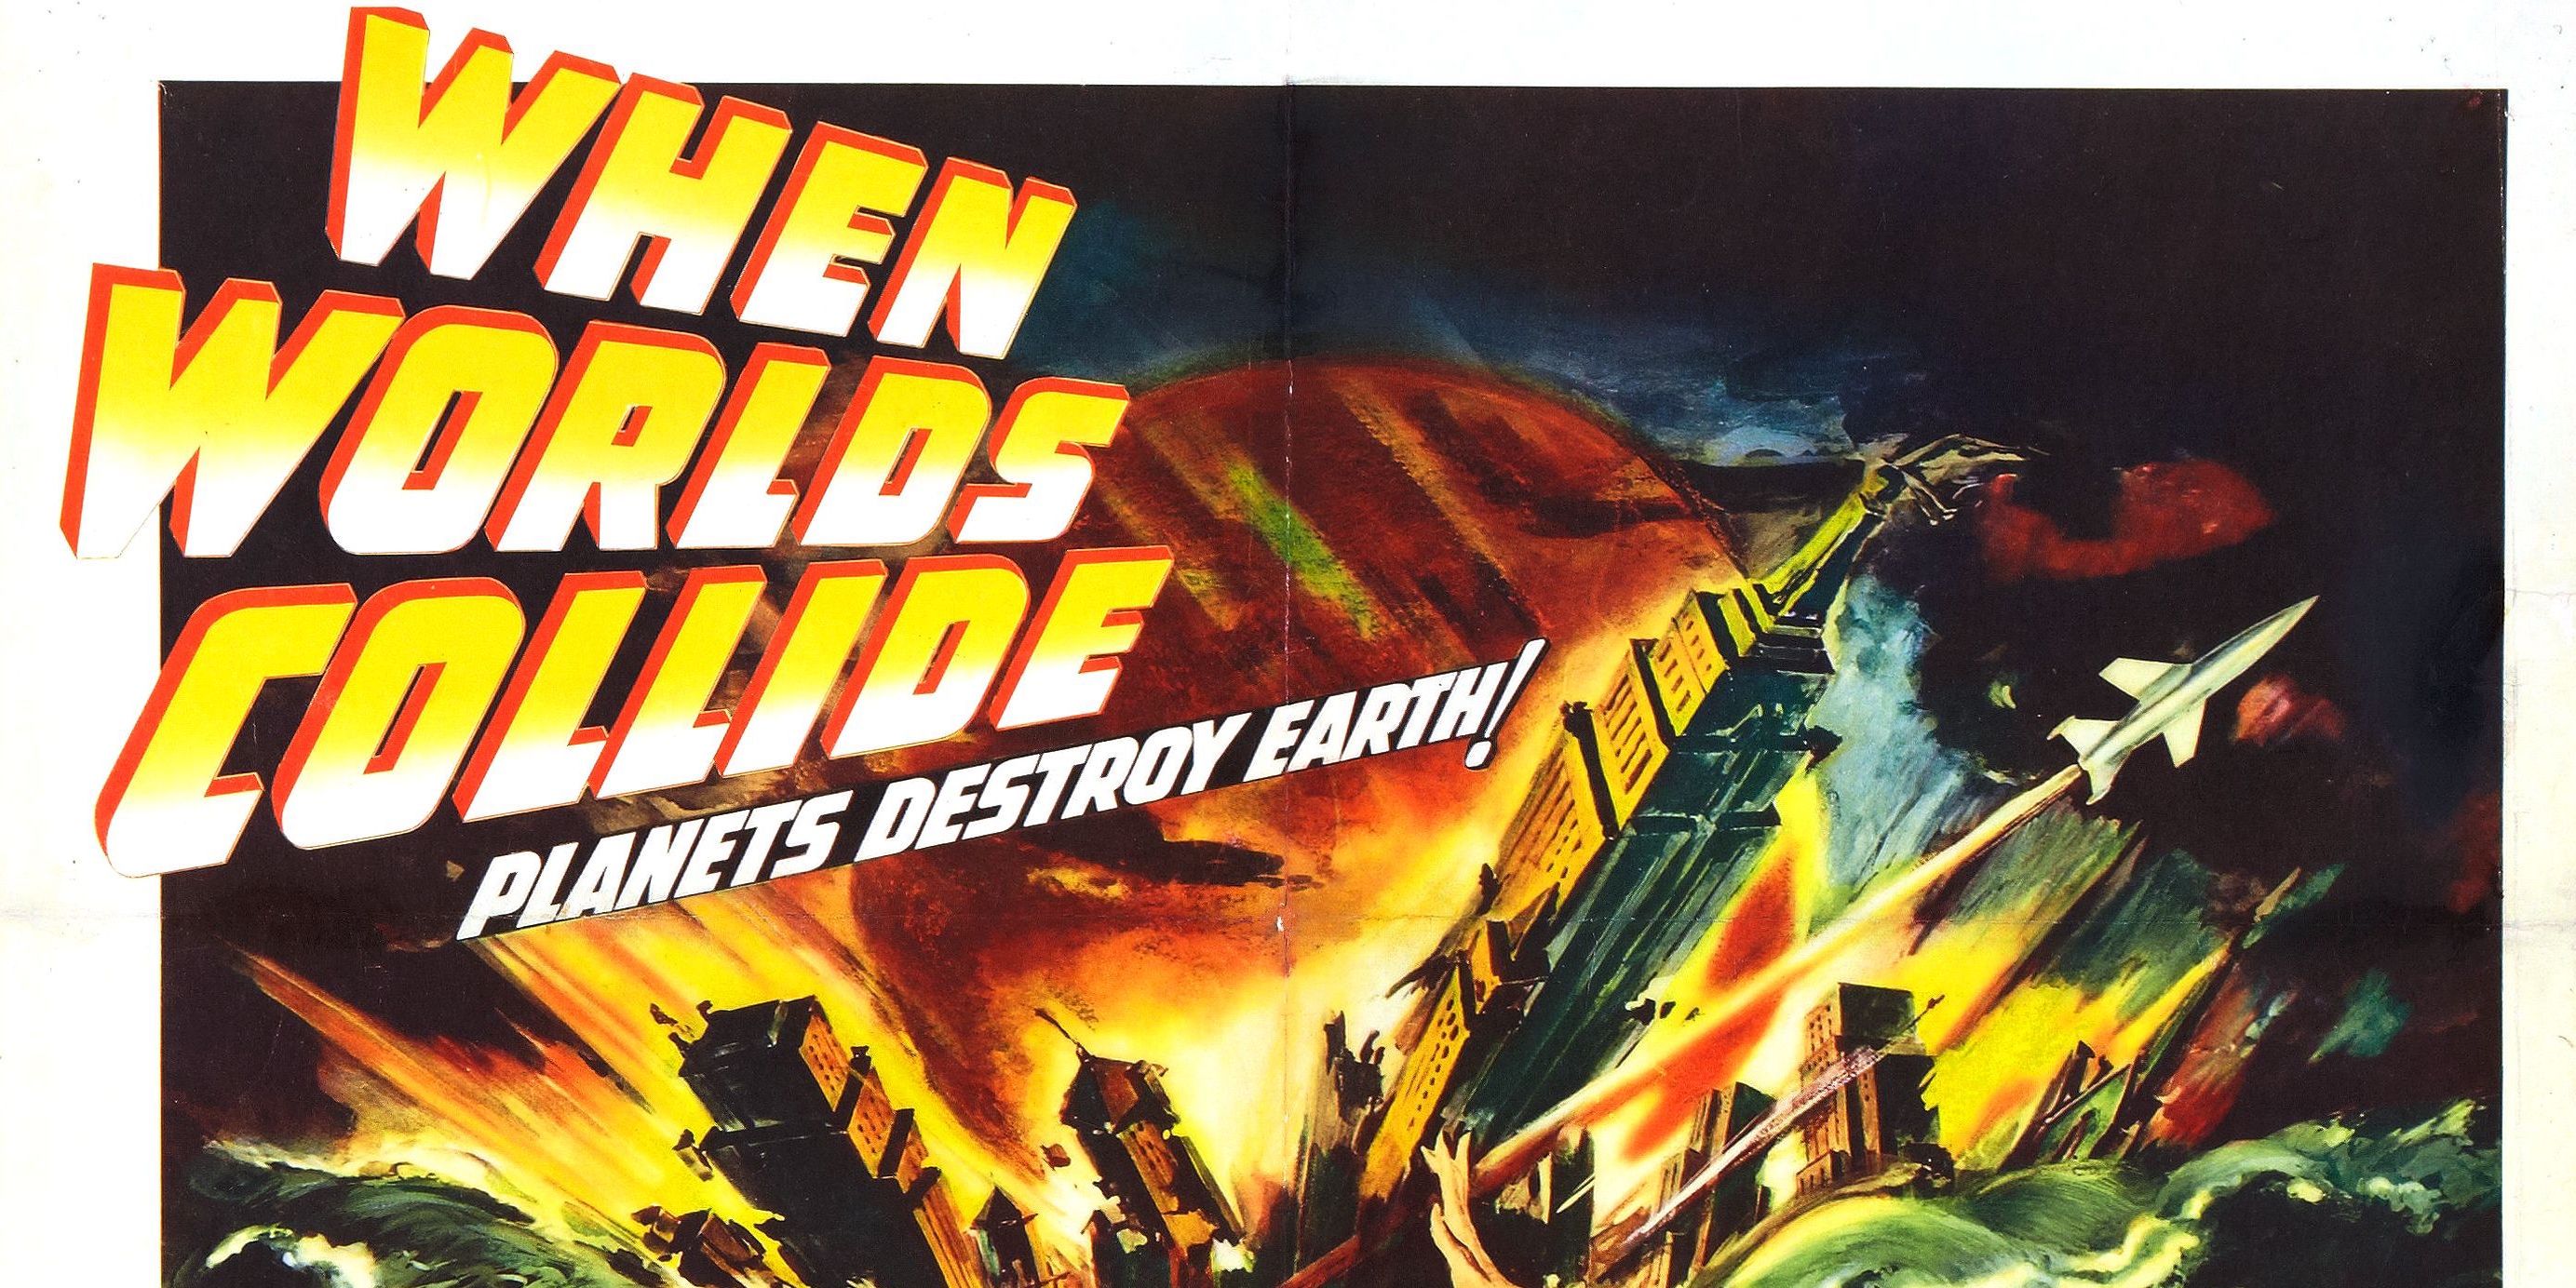 The theatrical poster of When Worlds Collide (1951)